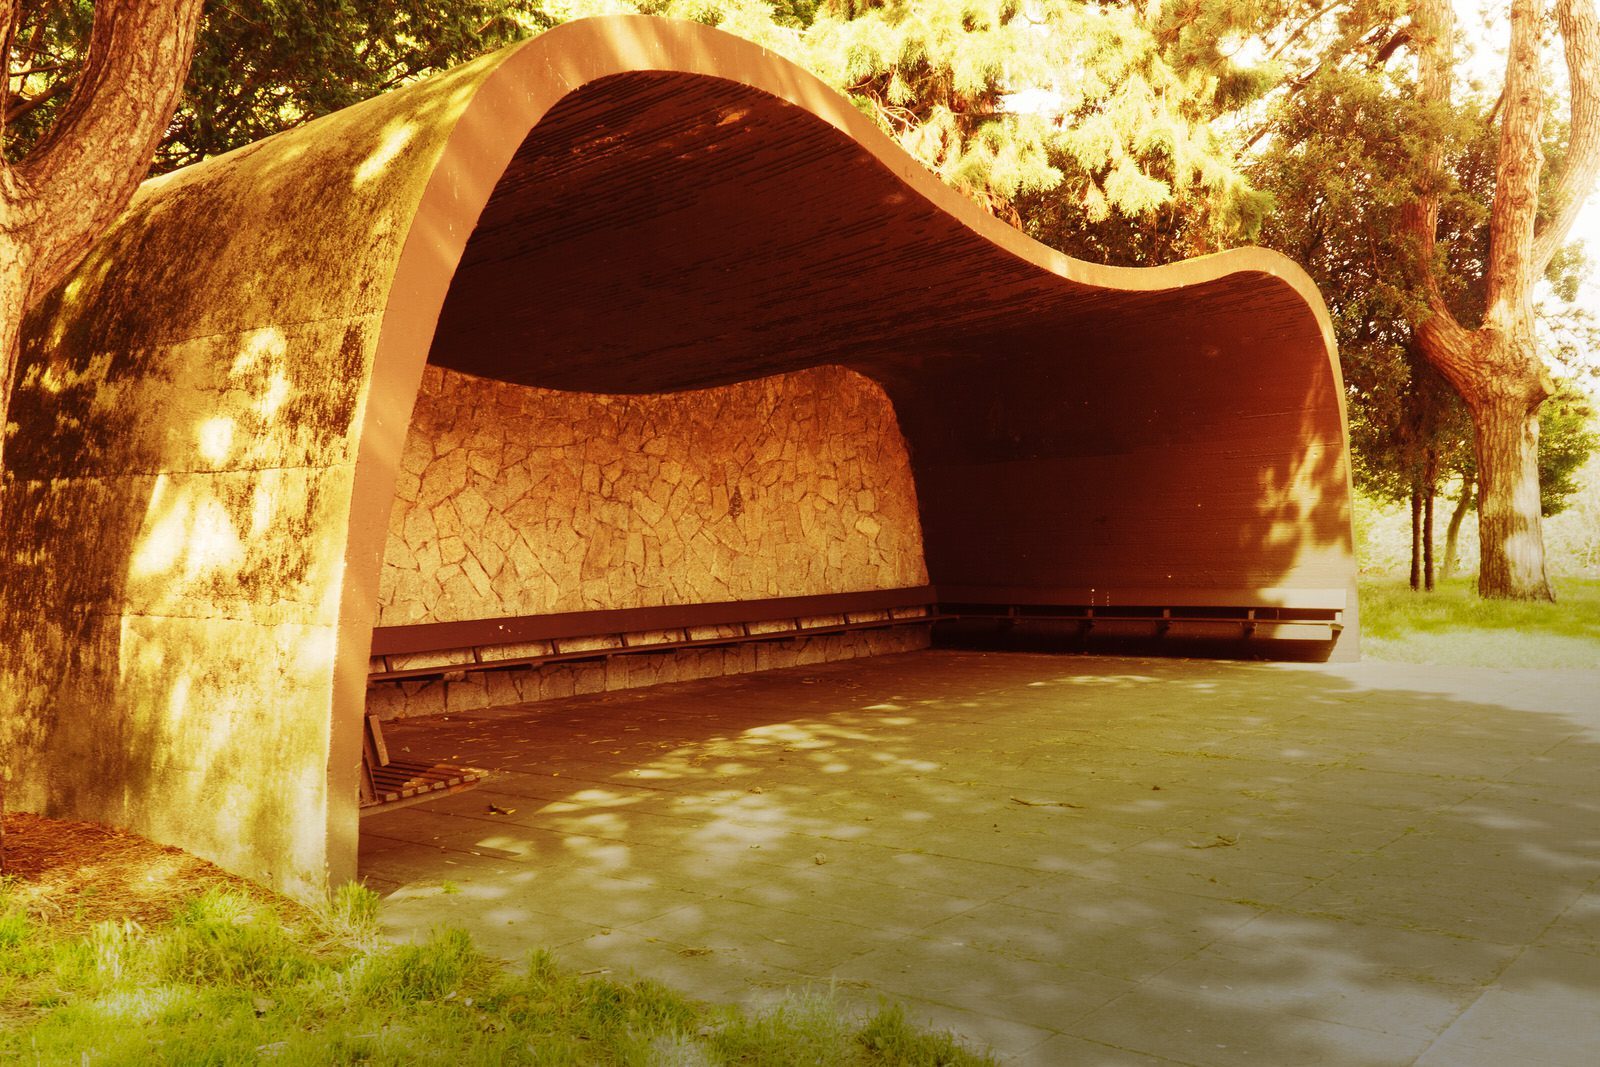 THE CONCRETE SHELTER IN PHOENIX PARK [LOCATED IN THE PEOPLE'S FLOWER GARDENS] 001